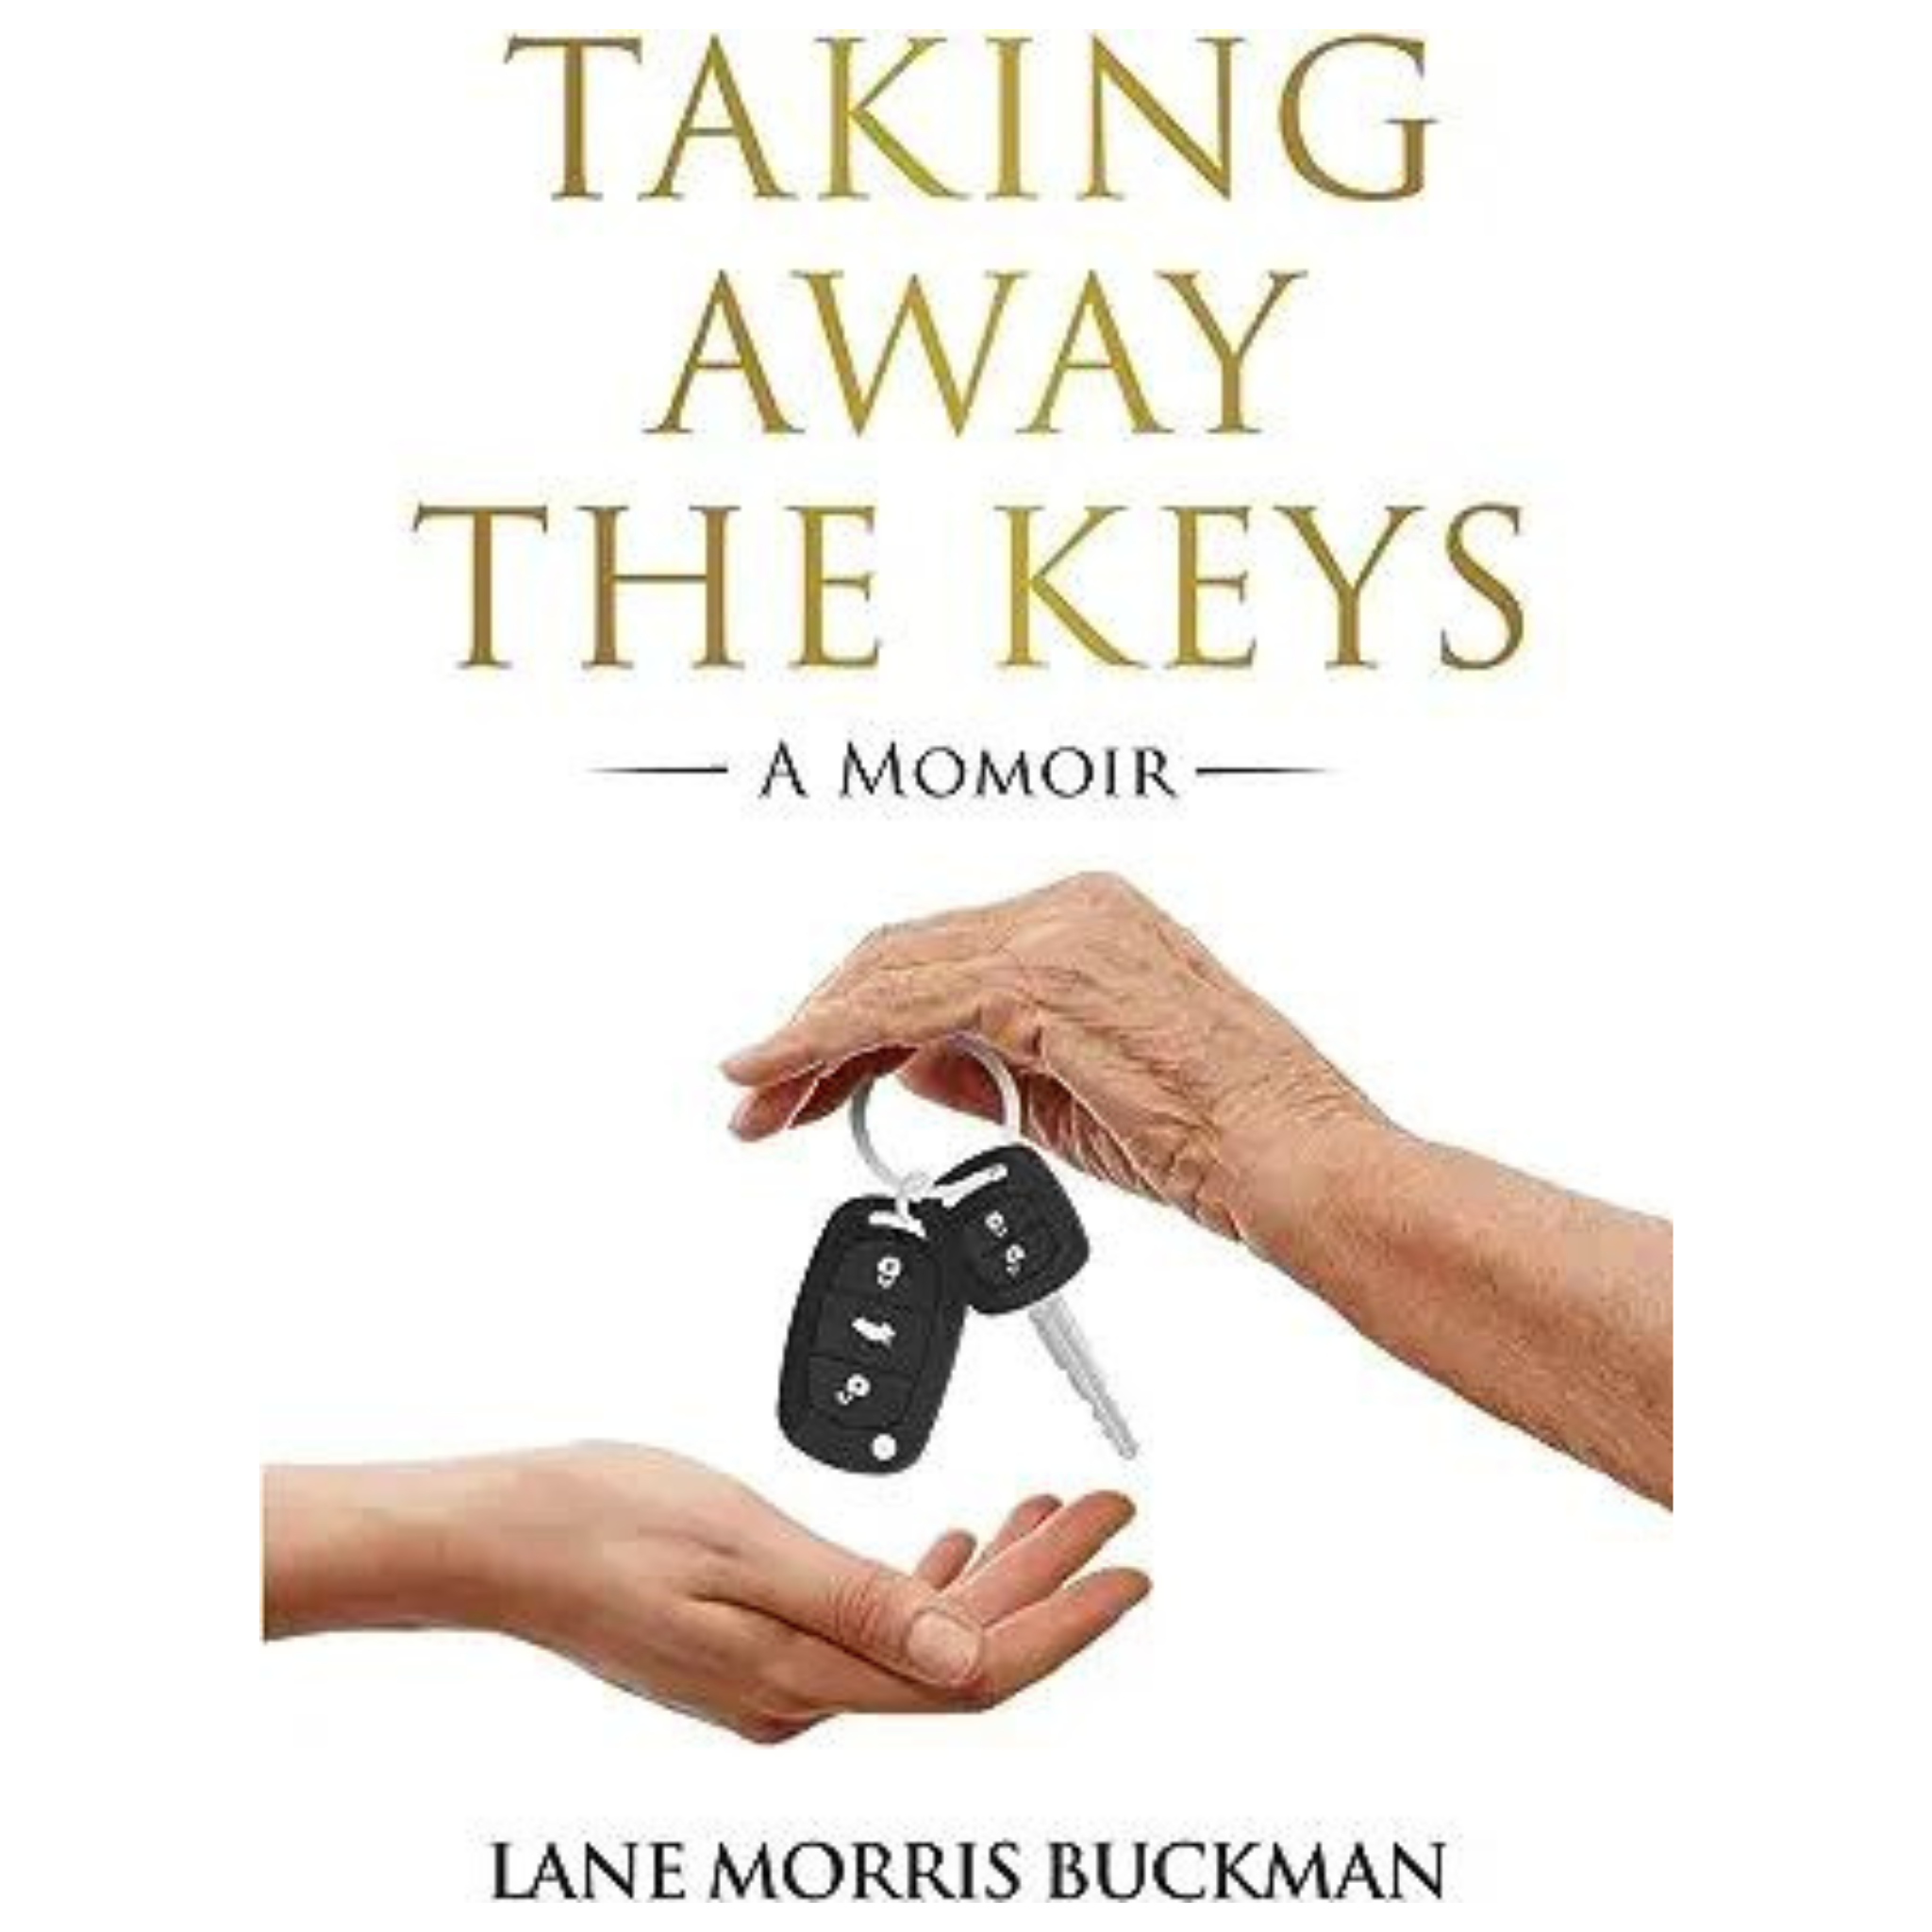 Taking Away The Keys - Author Event & Discussion Sept 19th 7-8pm